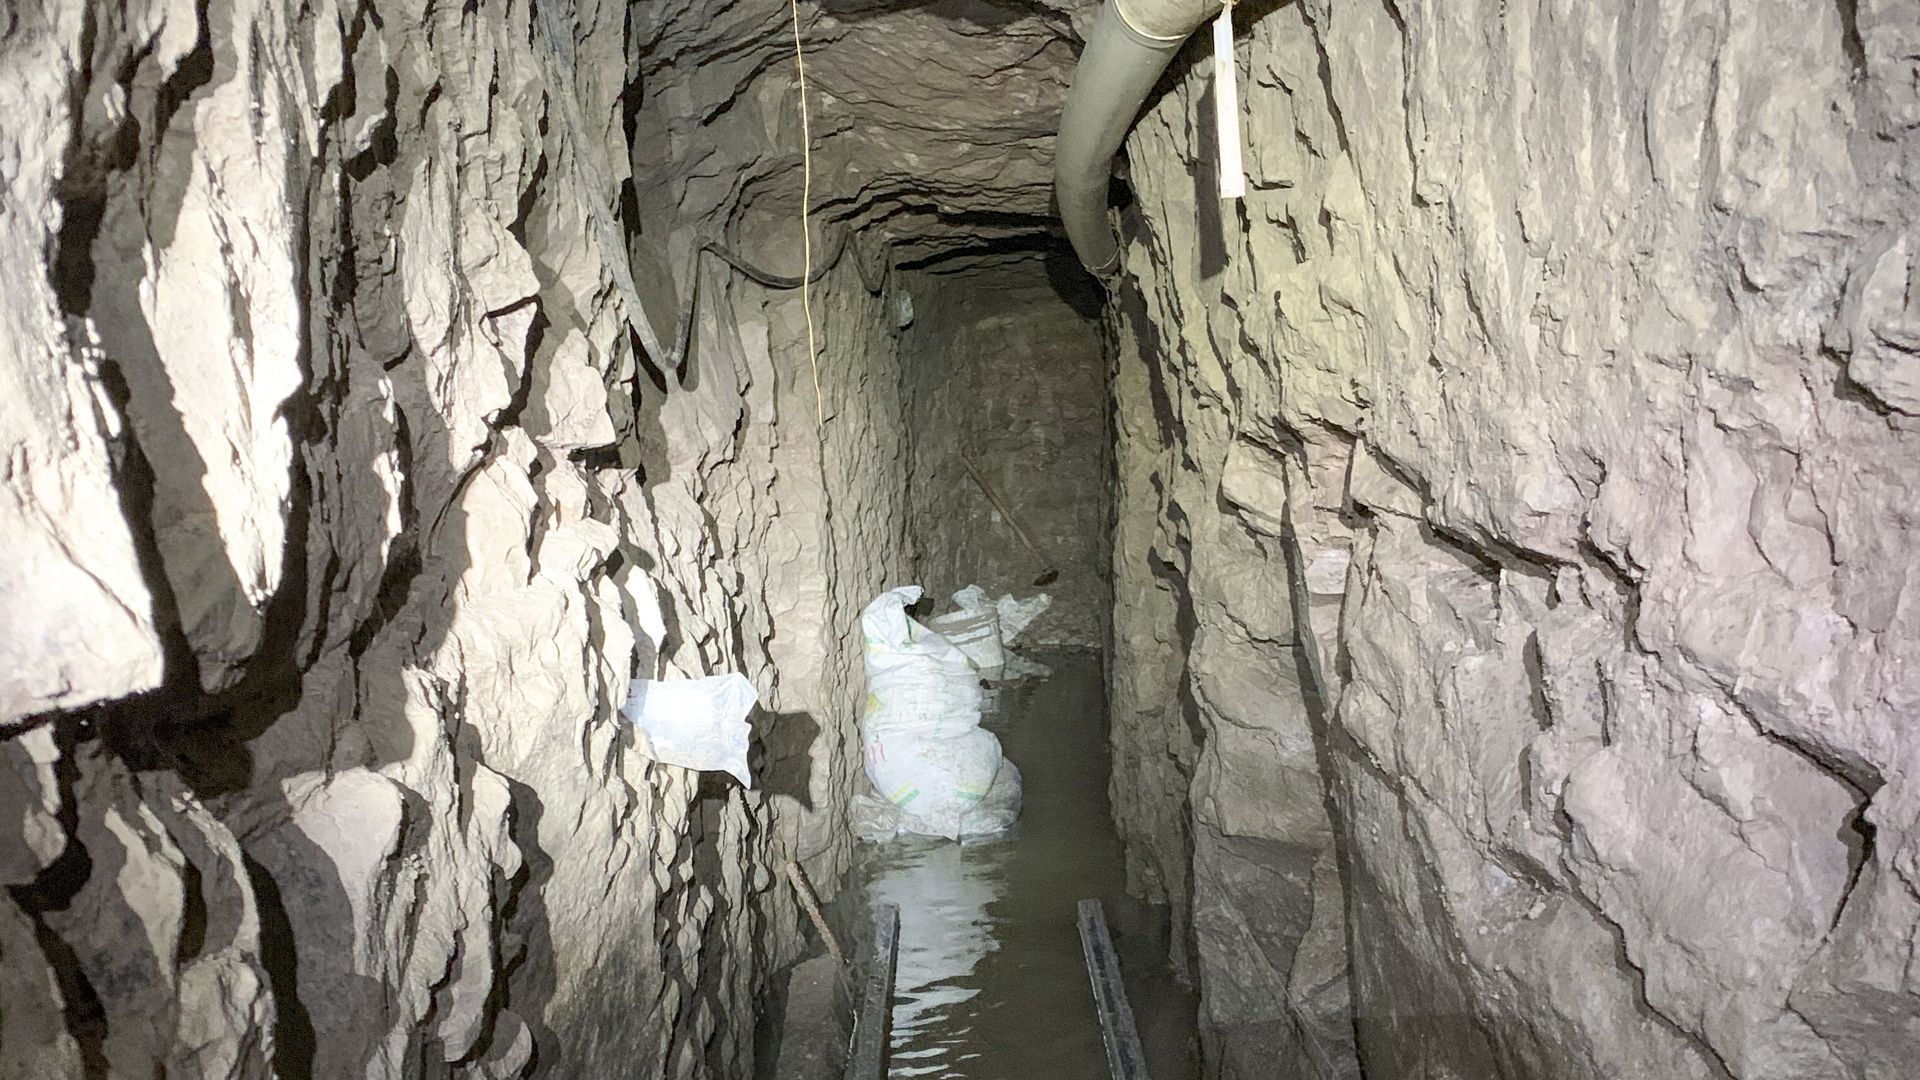 The tunnel discovered by the DEA